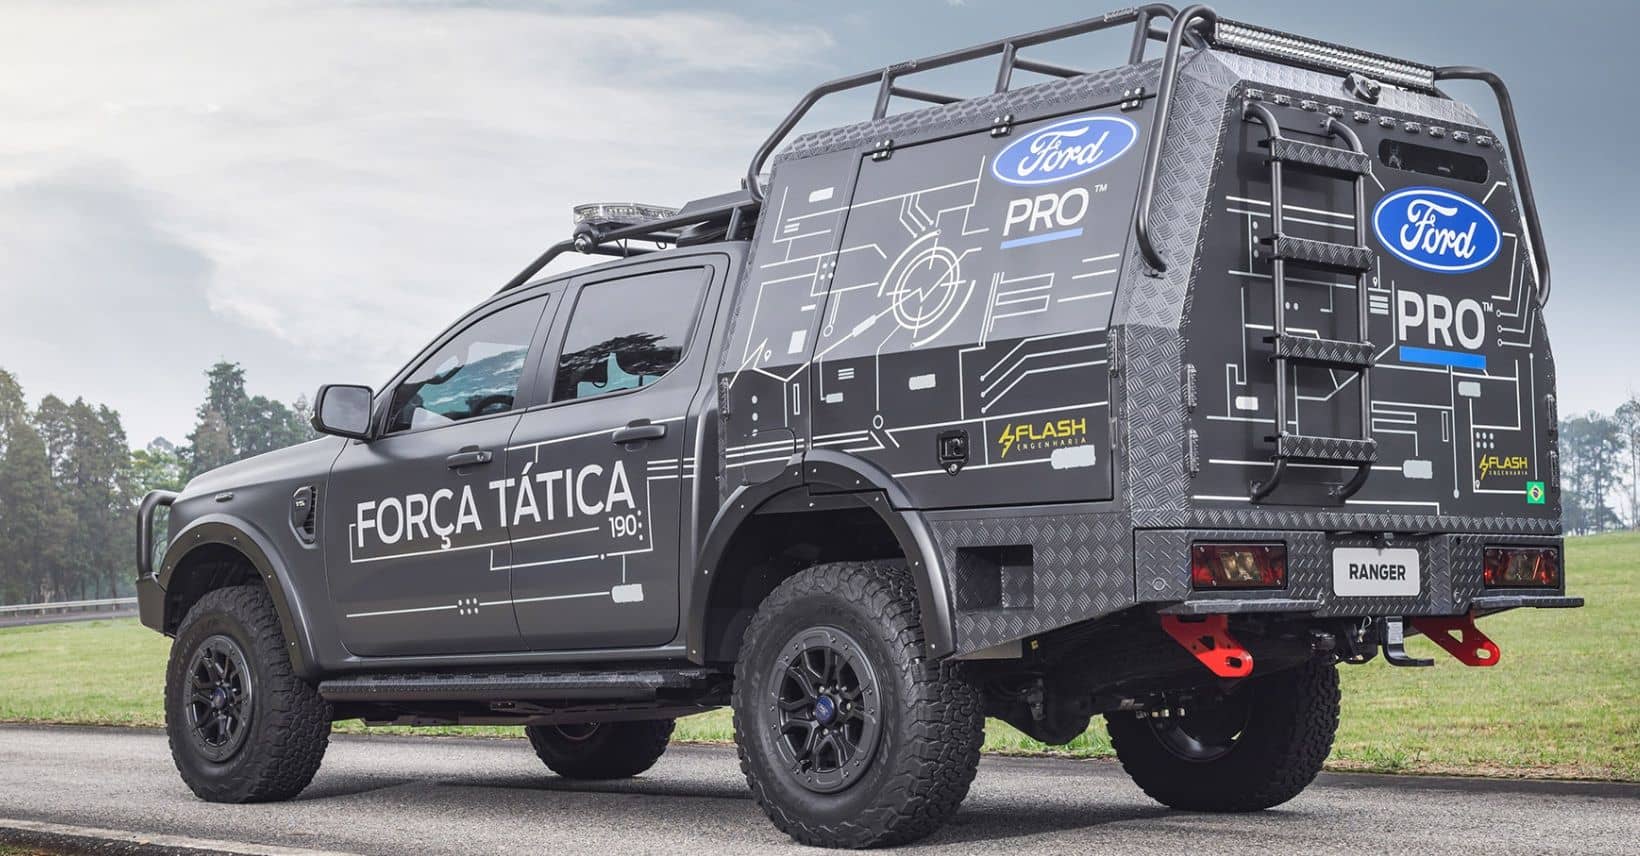 Ford Ranger Tactical Force